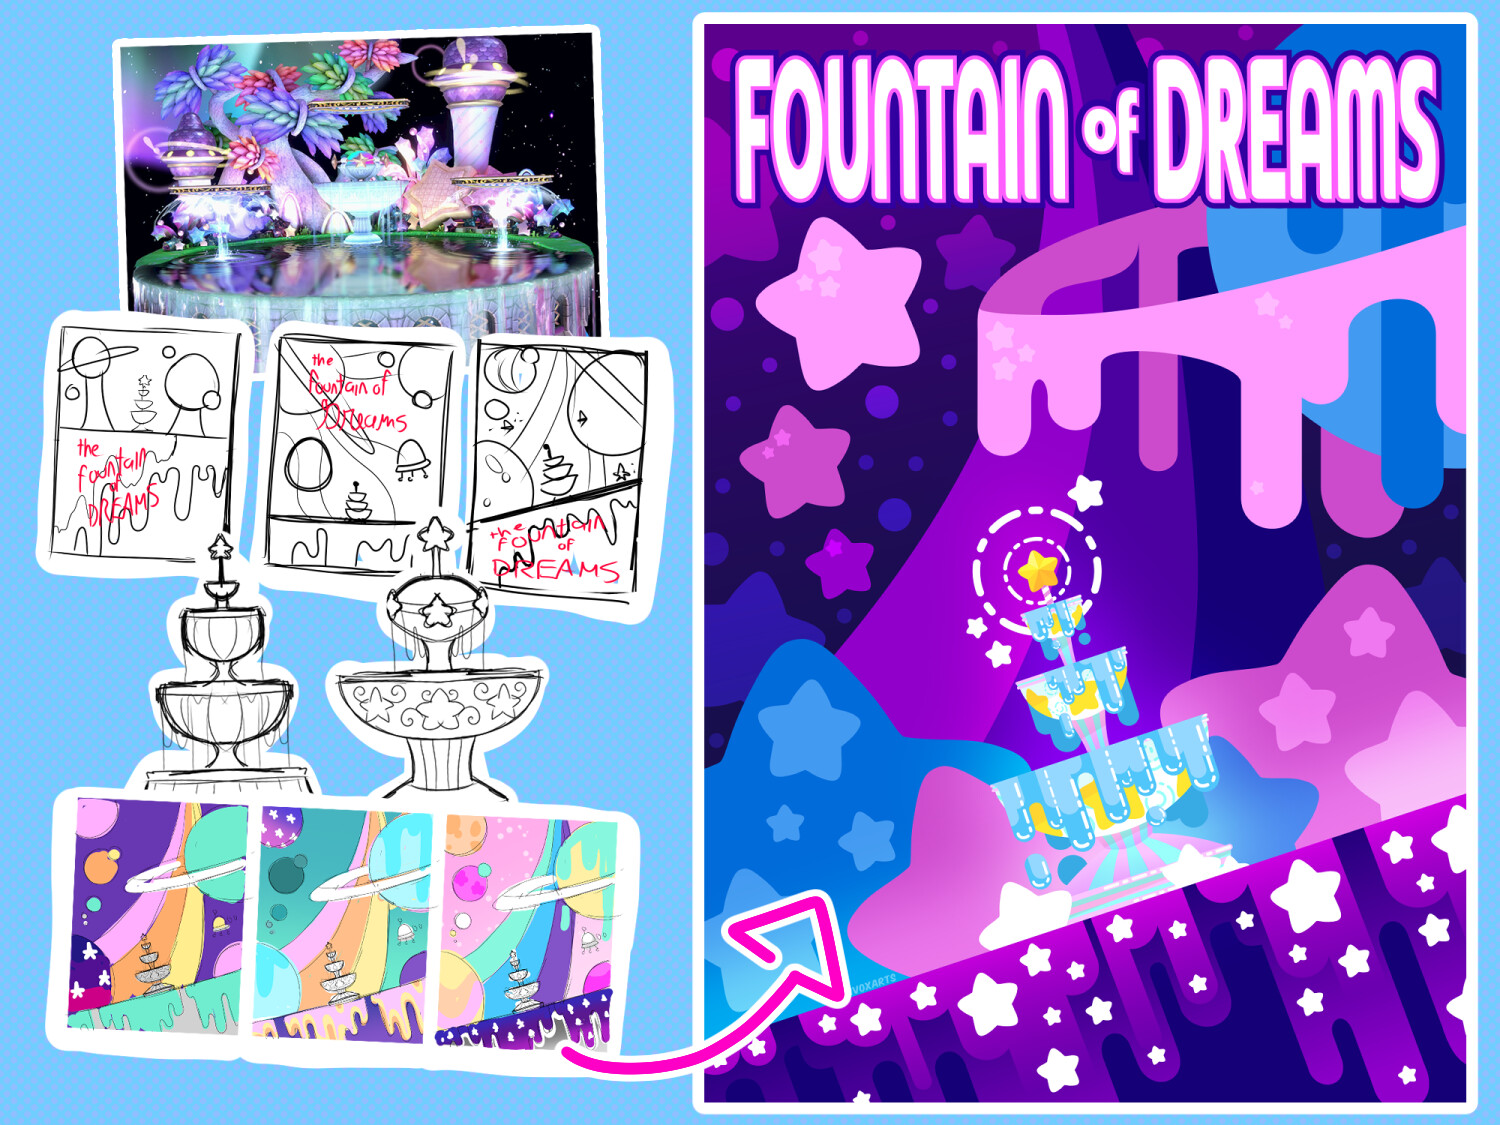 Fountain of Dreams' 💫⛲️ My first kirby fanart! I don't know why